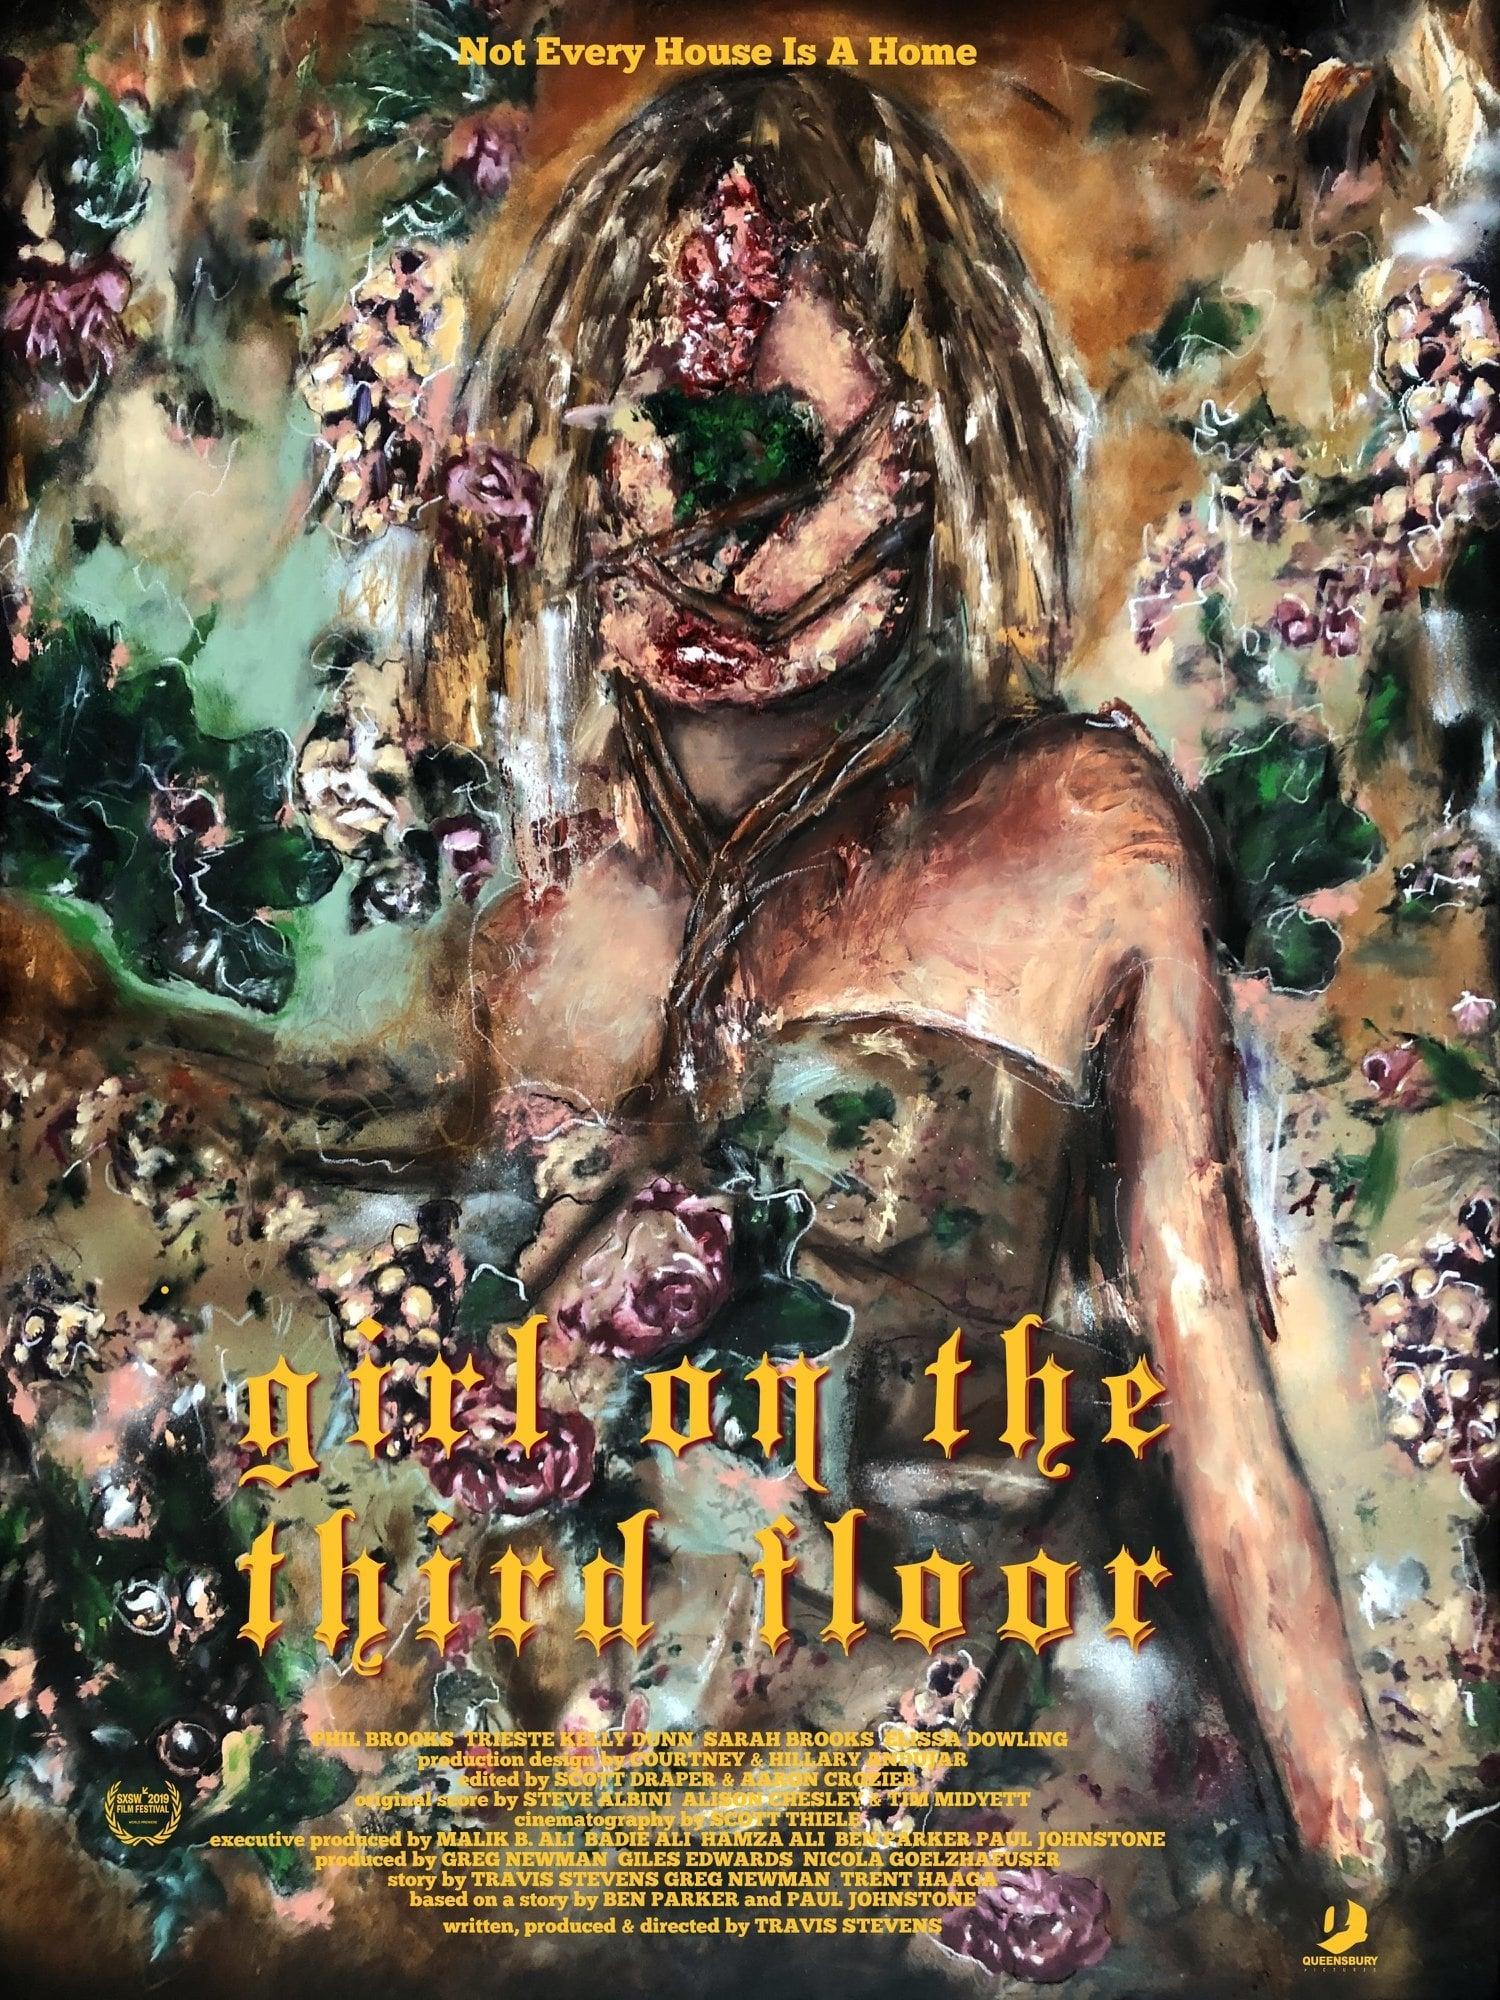 Girl on the Third Floor poster